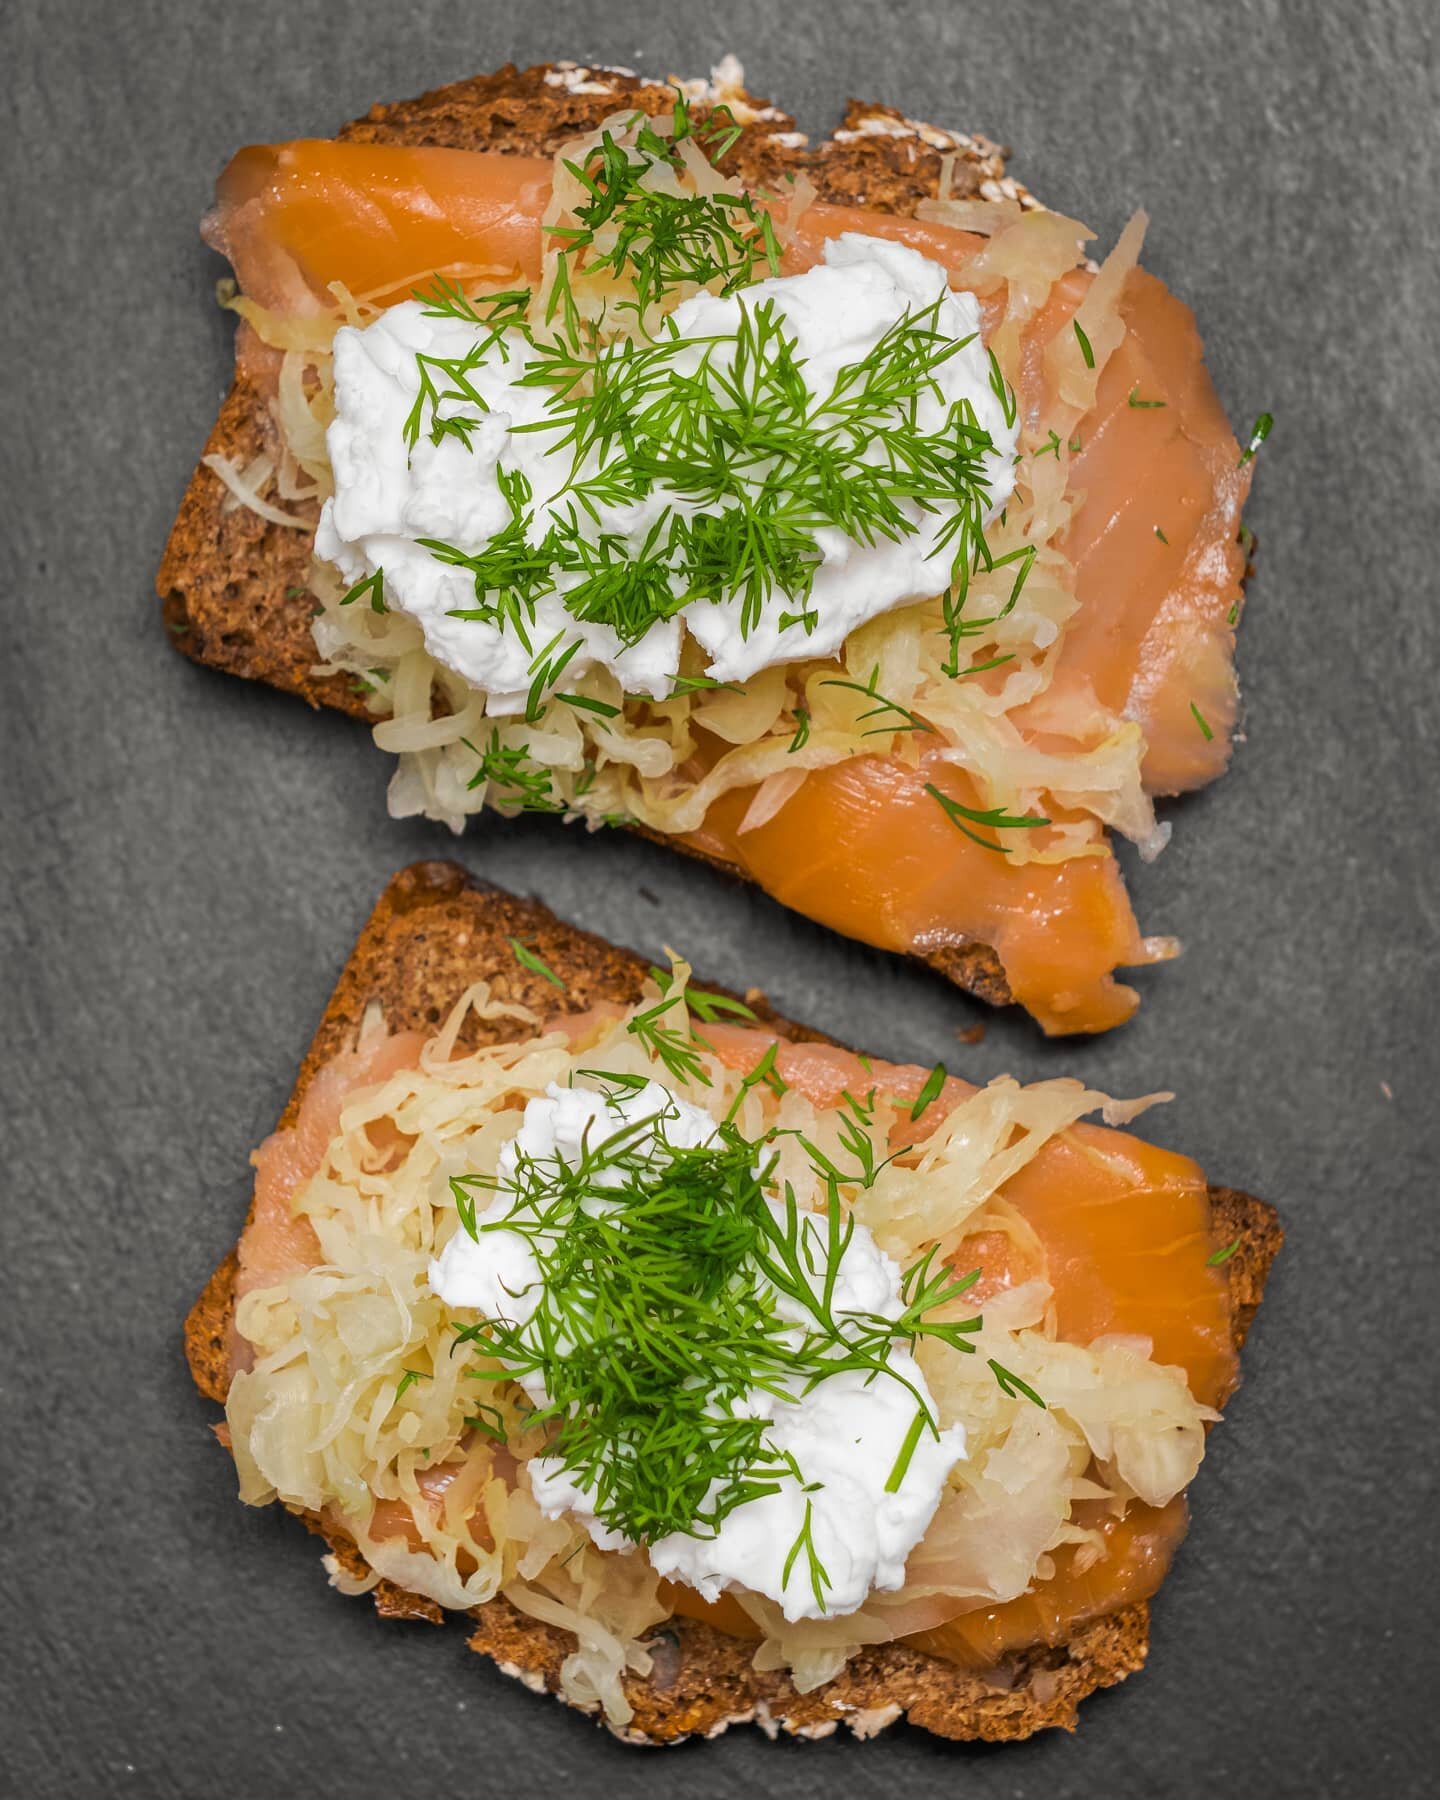 Salmon on brown bread with cream cheese and natural sauerkraut 😍 

Another fantastic recipe idea to make the most of our fermented foods!🍴

#sauerkraut #fermentedfoods #guthealth #microbiome #gutbacteria #fermentation #healthygut #healthyfoods #rec